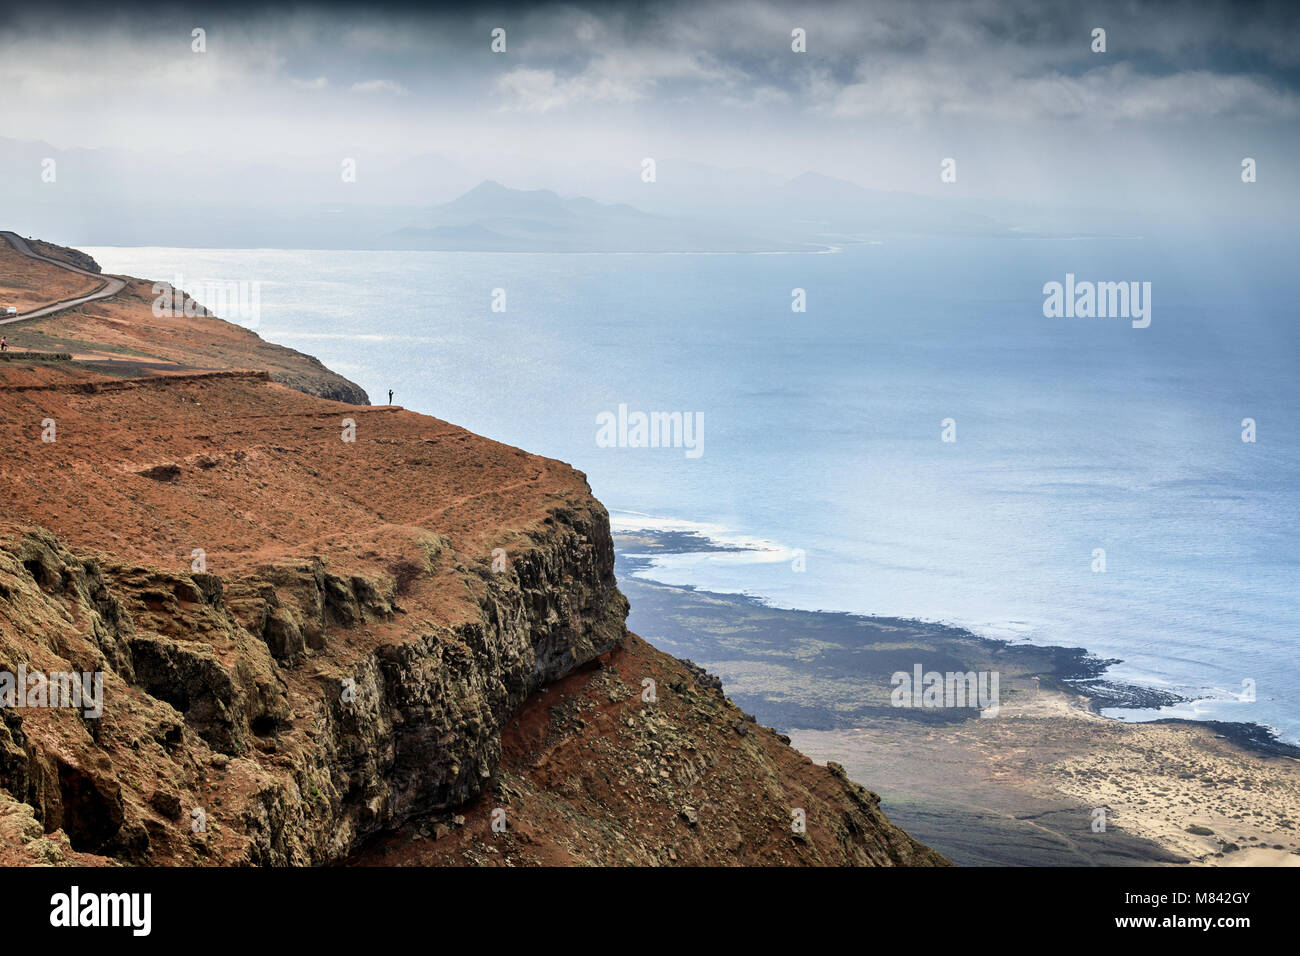 Mirador del Río is a viewpoint situated on an approximately 475 meters high escarpment called Batería del Río on Lanzarote, Canary Islands, Spain Stock Photo